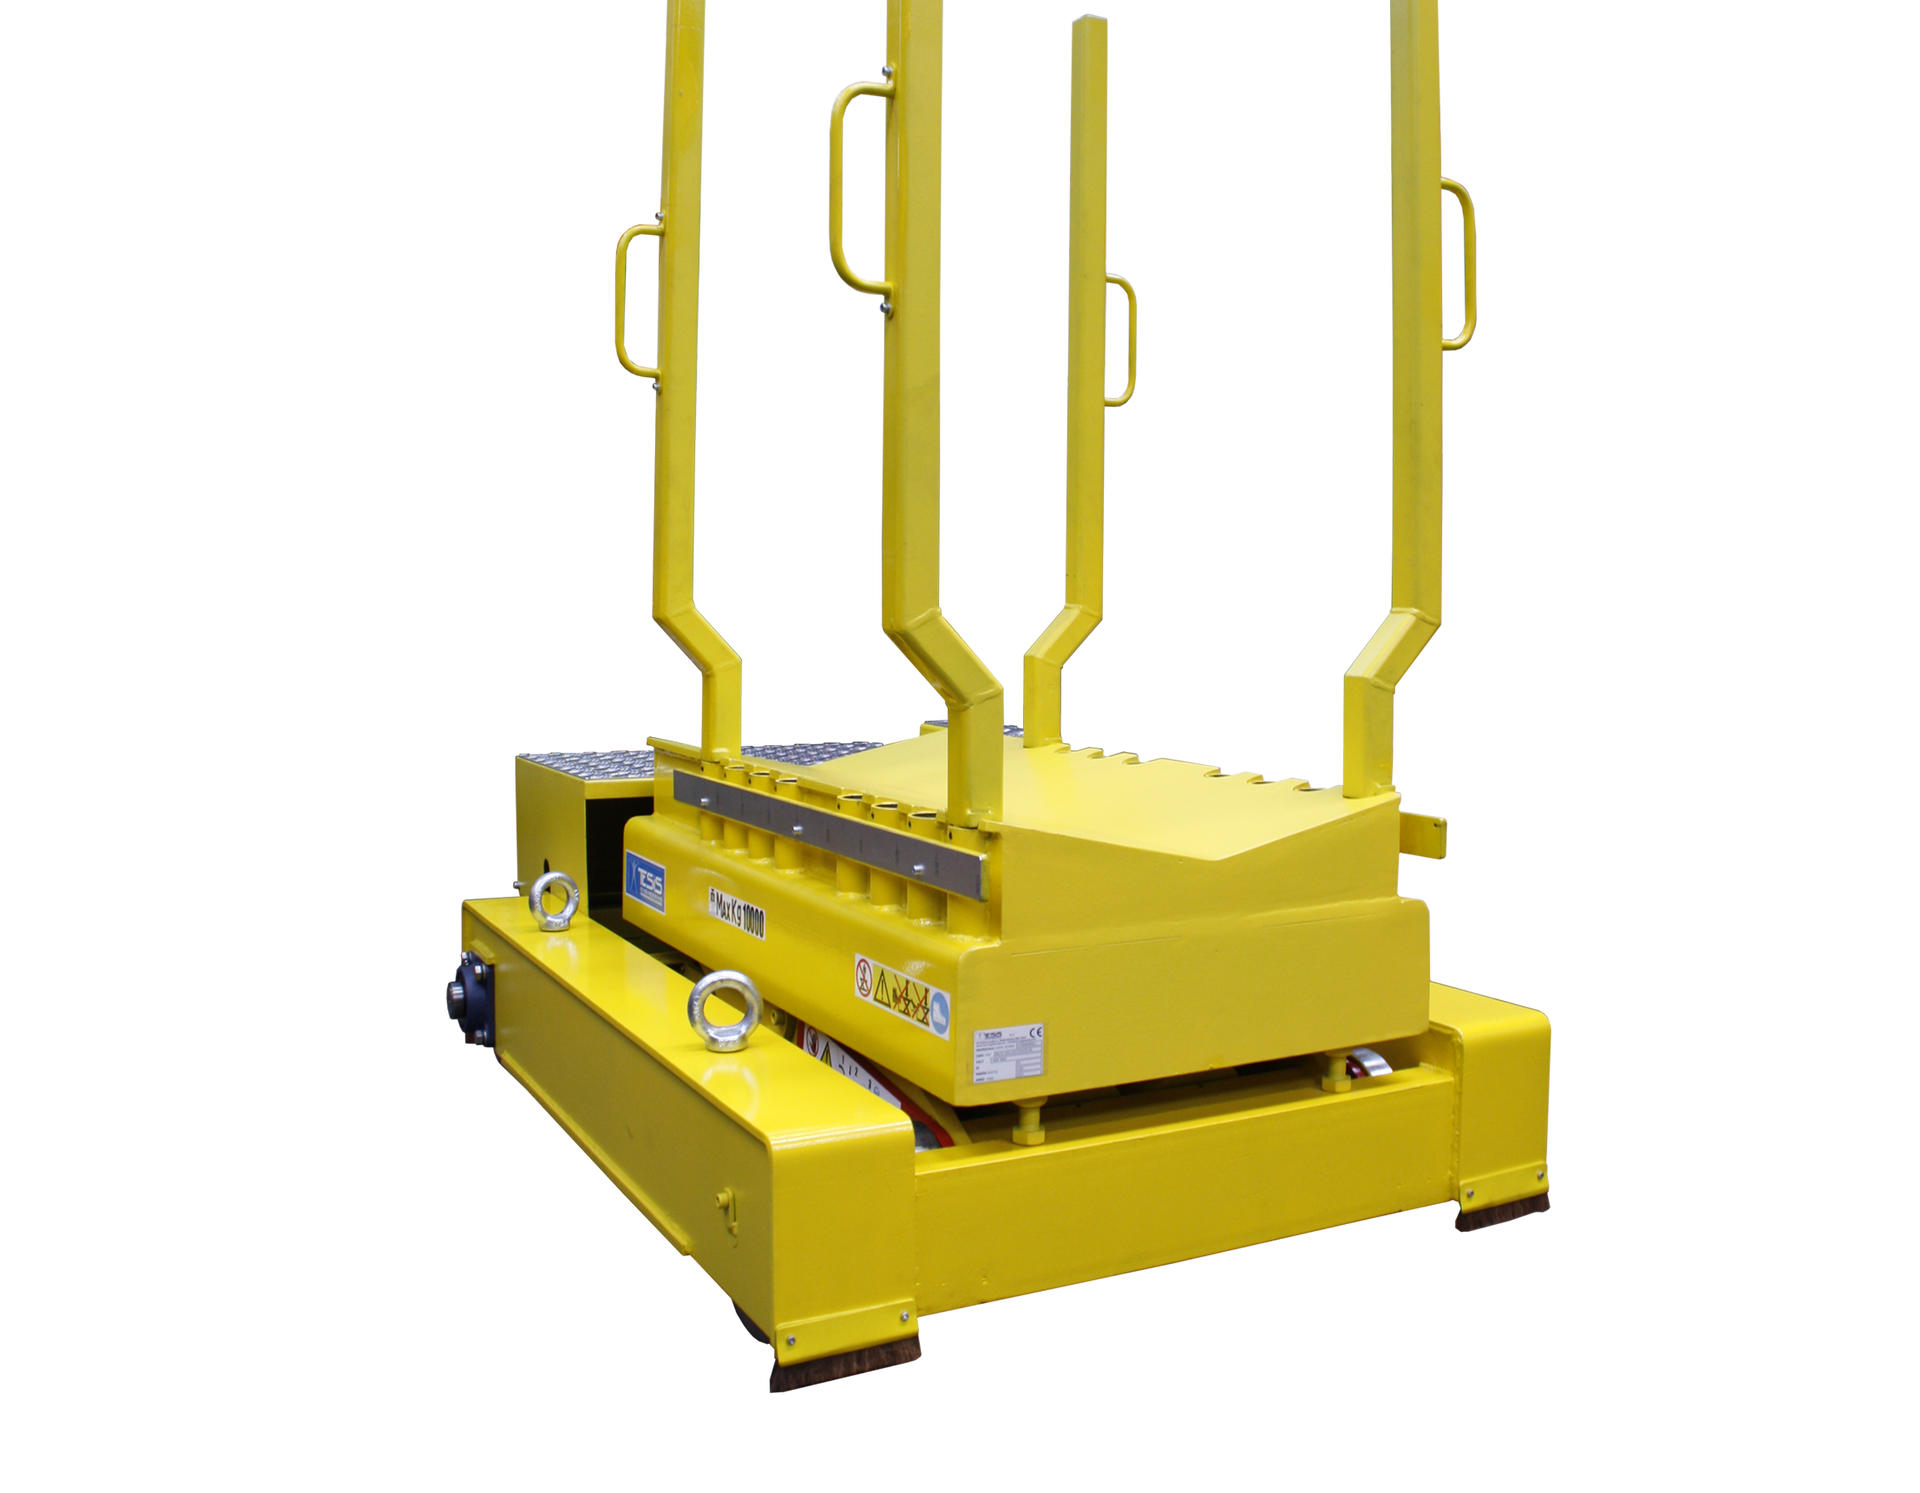 Lift table for handling coils and reels, lifting table with adjustable coil holders, scissor platform lift for cylindrical loads, coil transfer car, self-propelled scissor lift